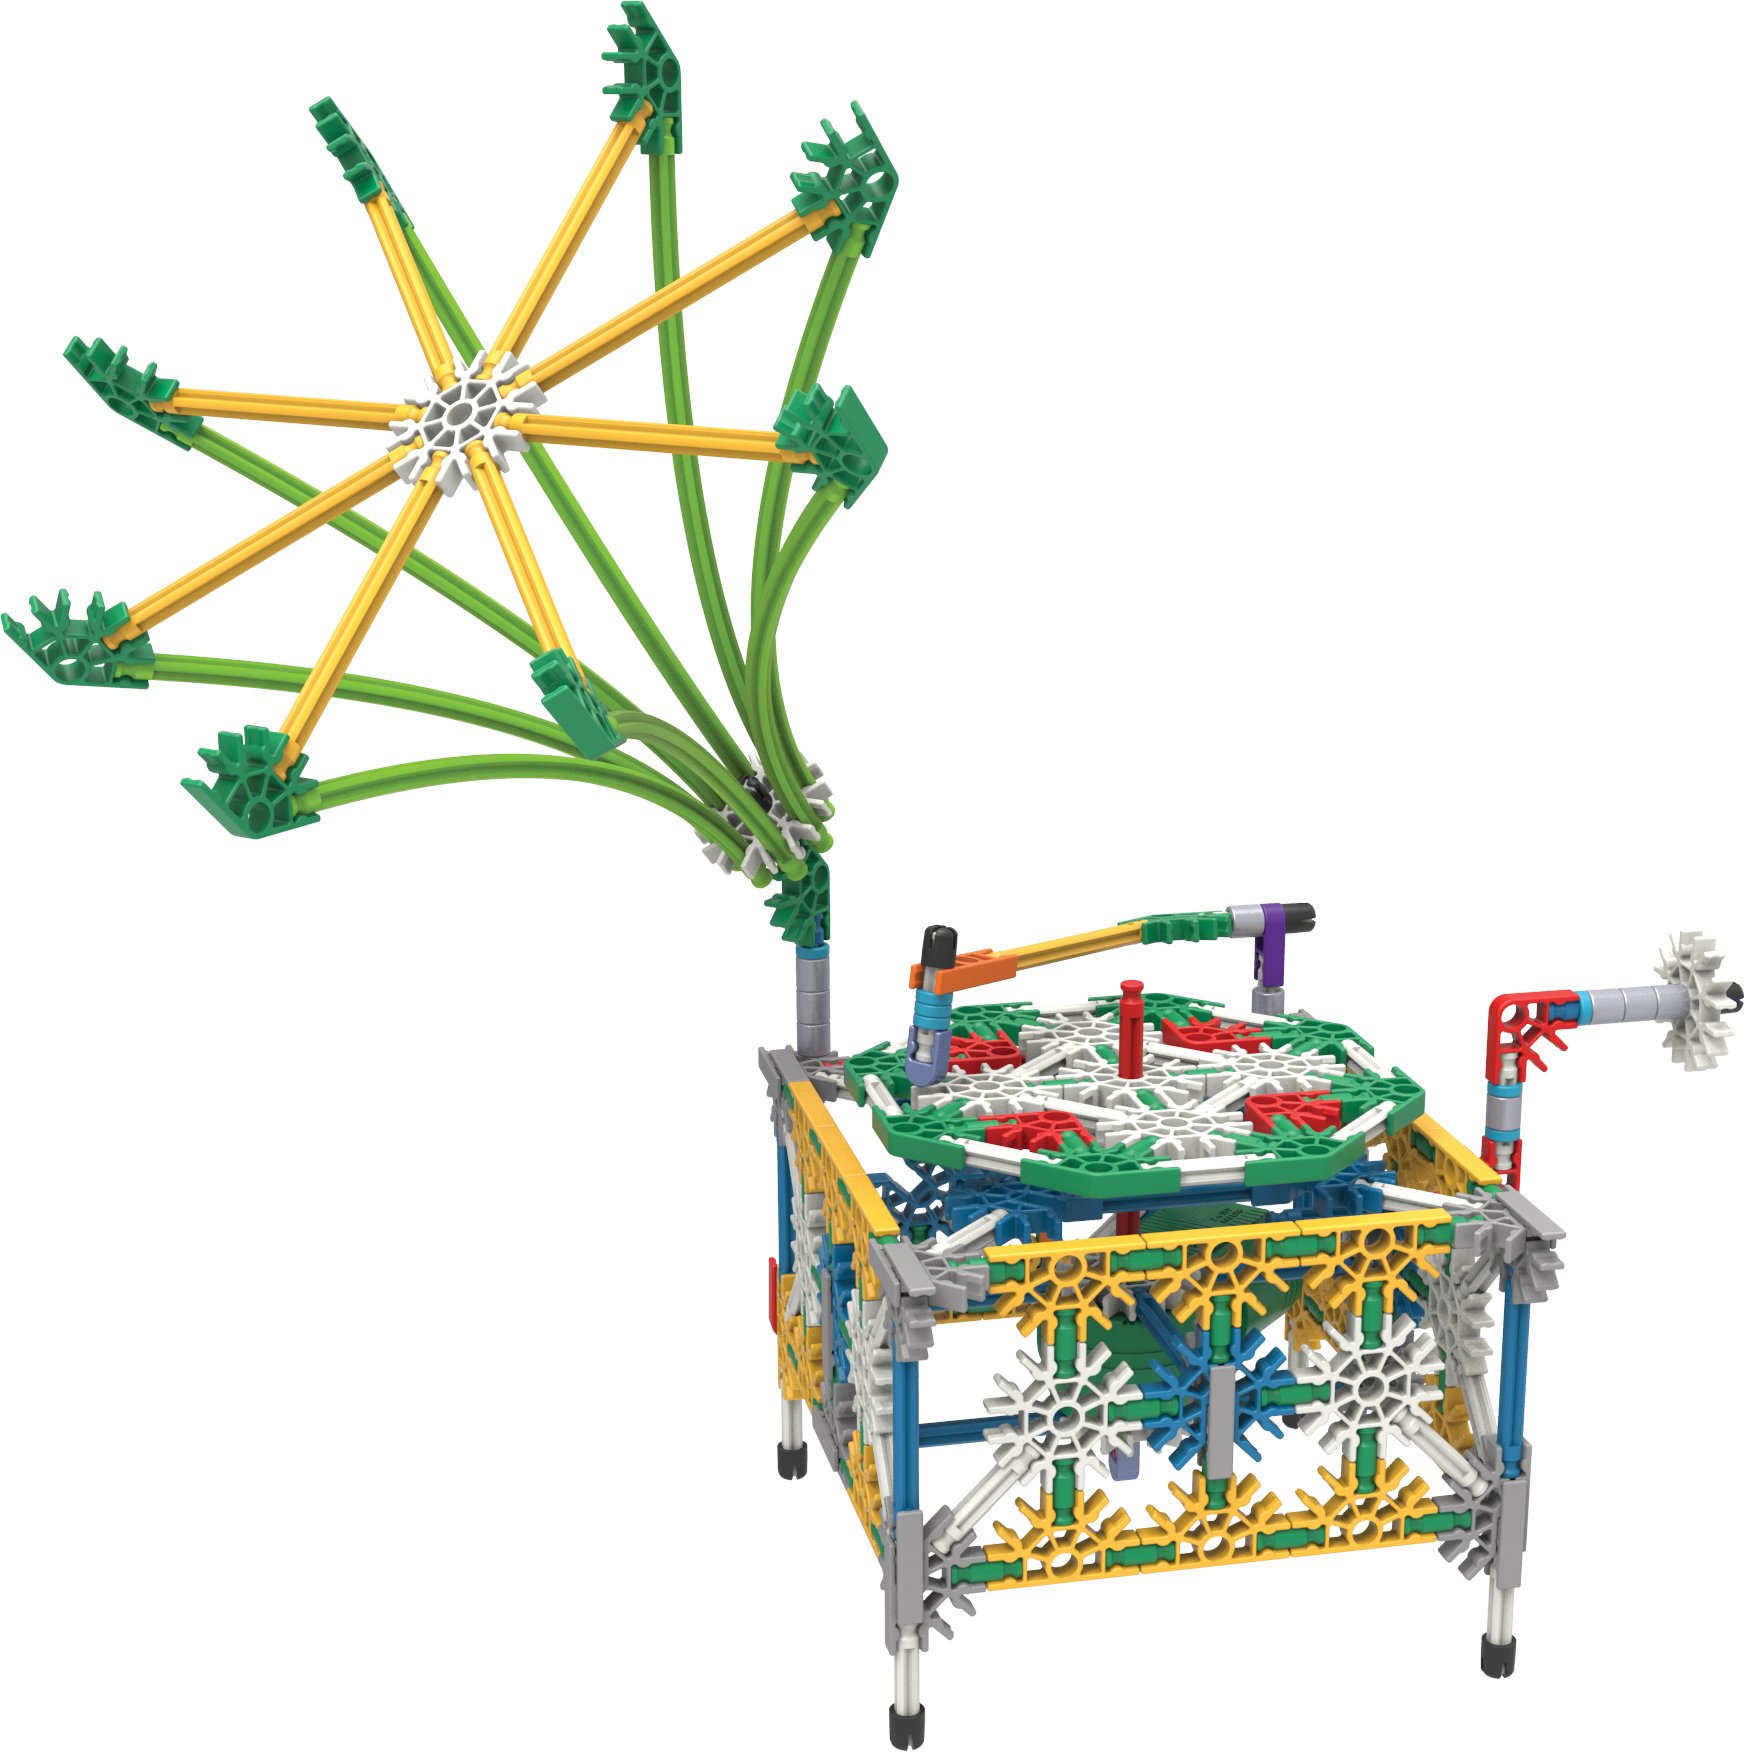 K'NEX Imagine Power and Play Motorized Building Set 529 Pieces Ages 7 and Up Construction Educational Toy